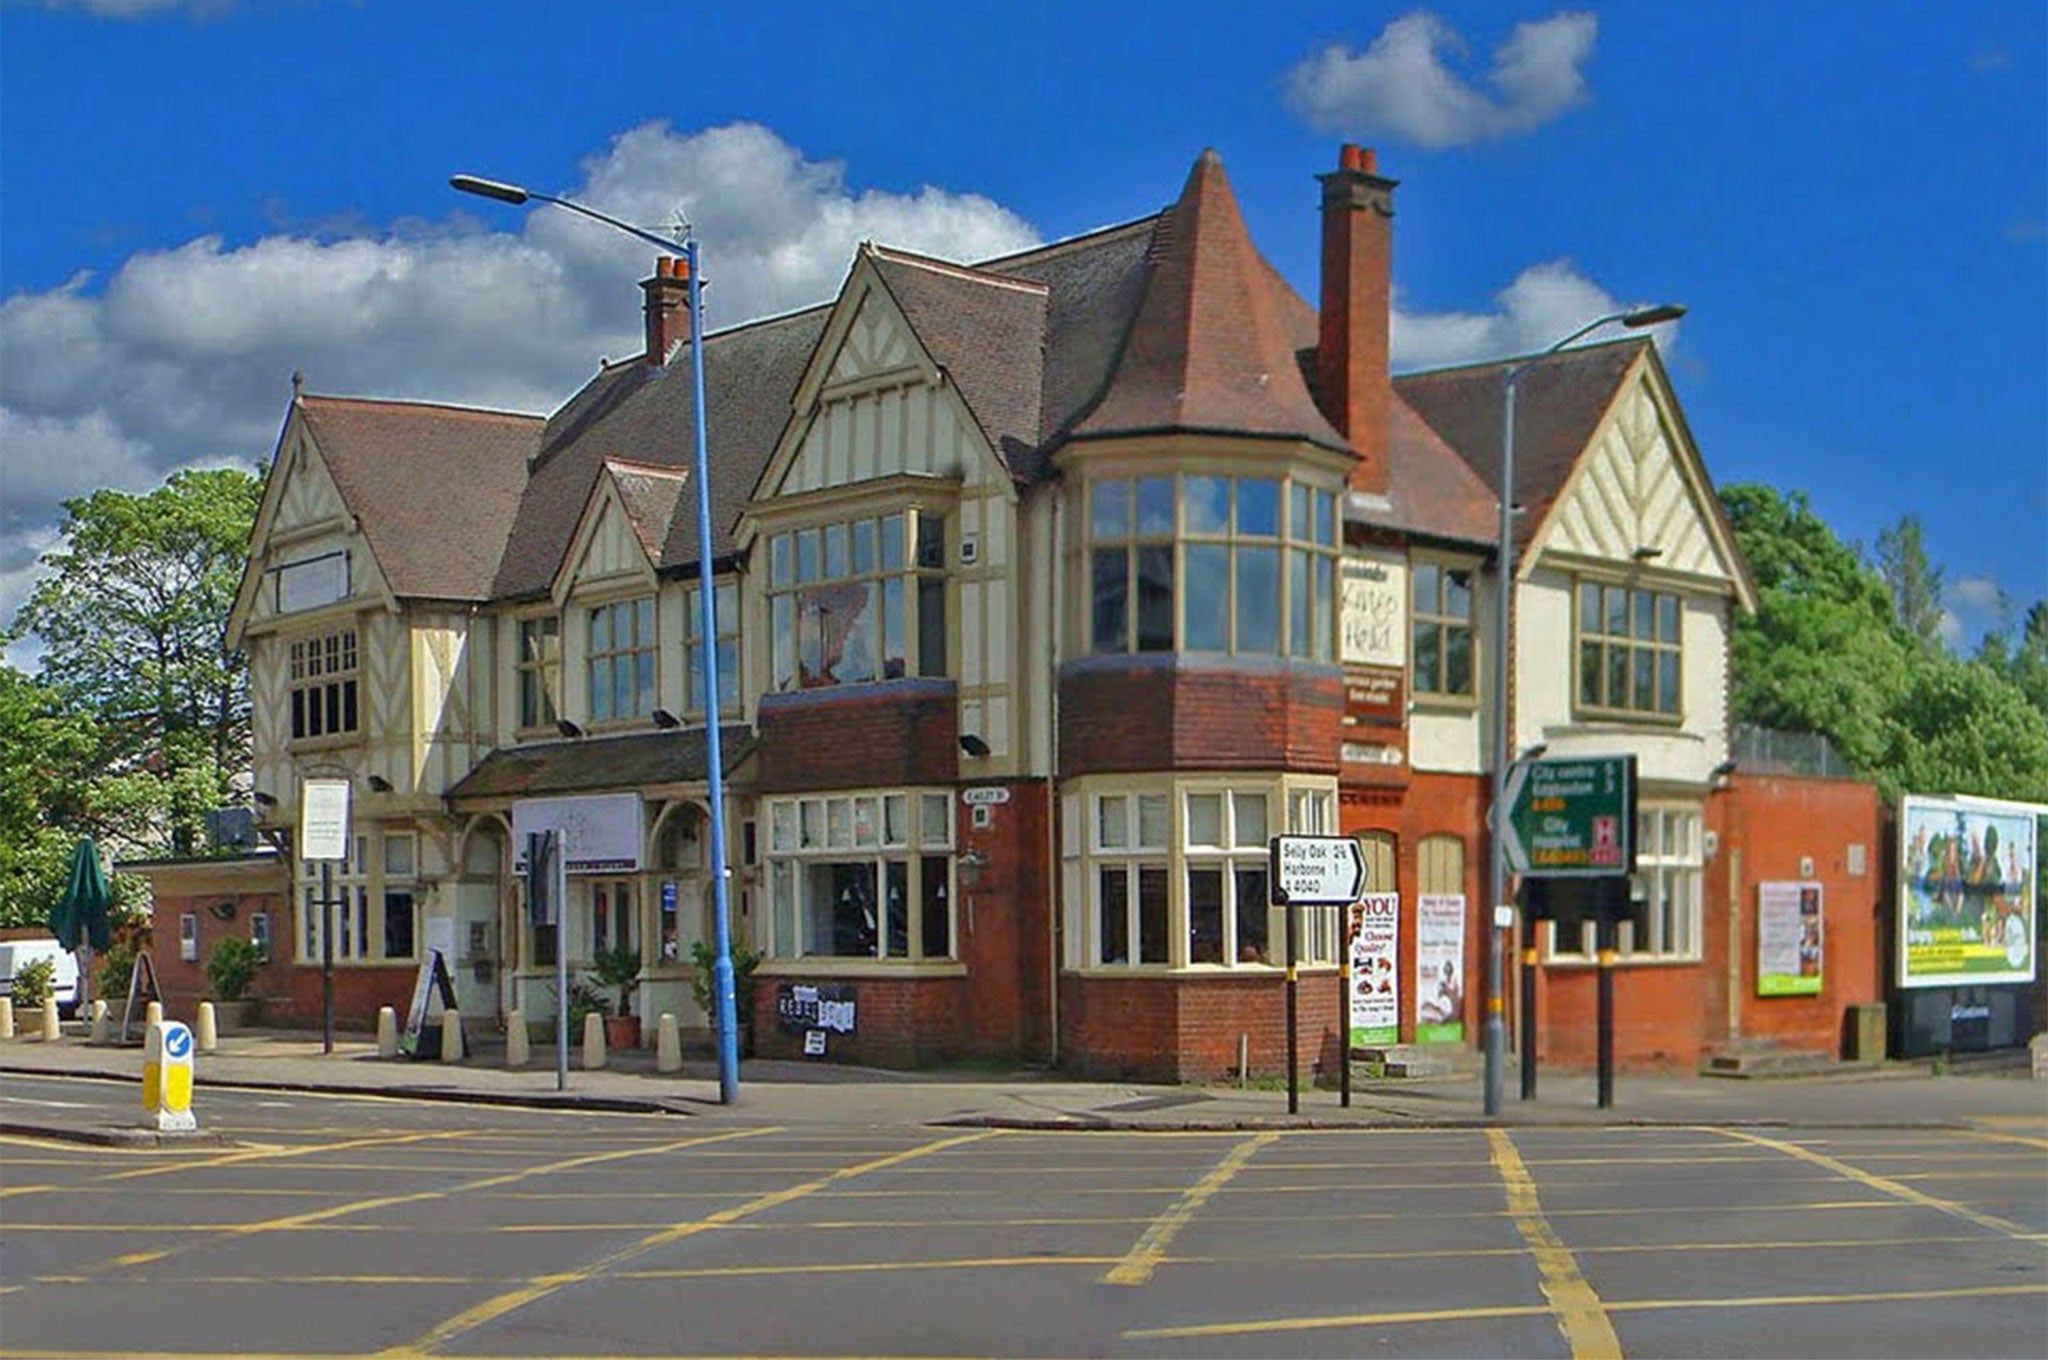 The King's Head pub in Birmingham from which Troy Hitchins, a wheelchair user, was carried out